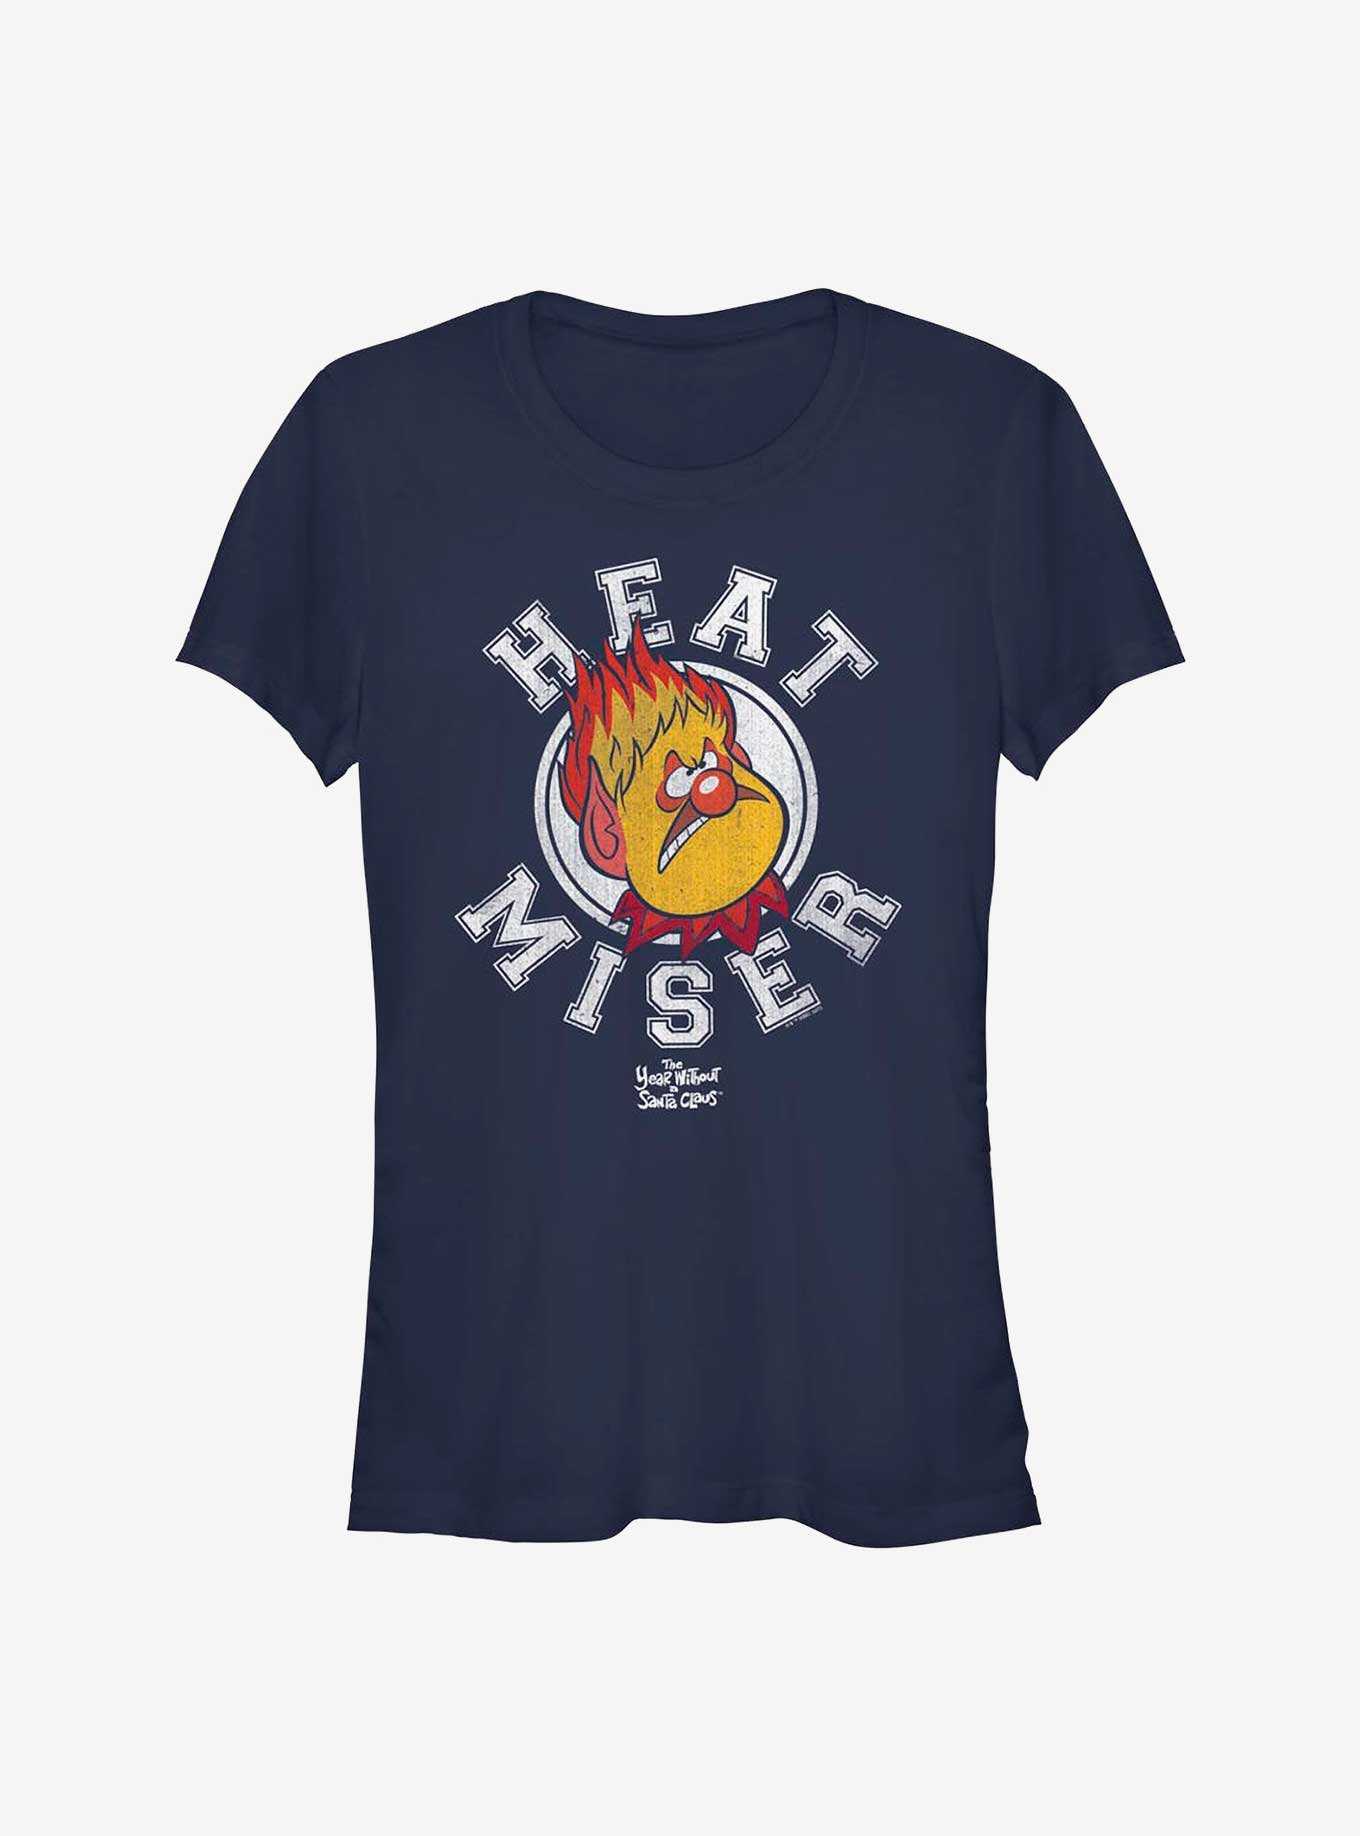 The Year Without A Santa Claus Heat Miser Badge Girls T-Shirt, , hi-res